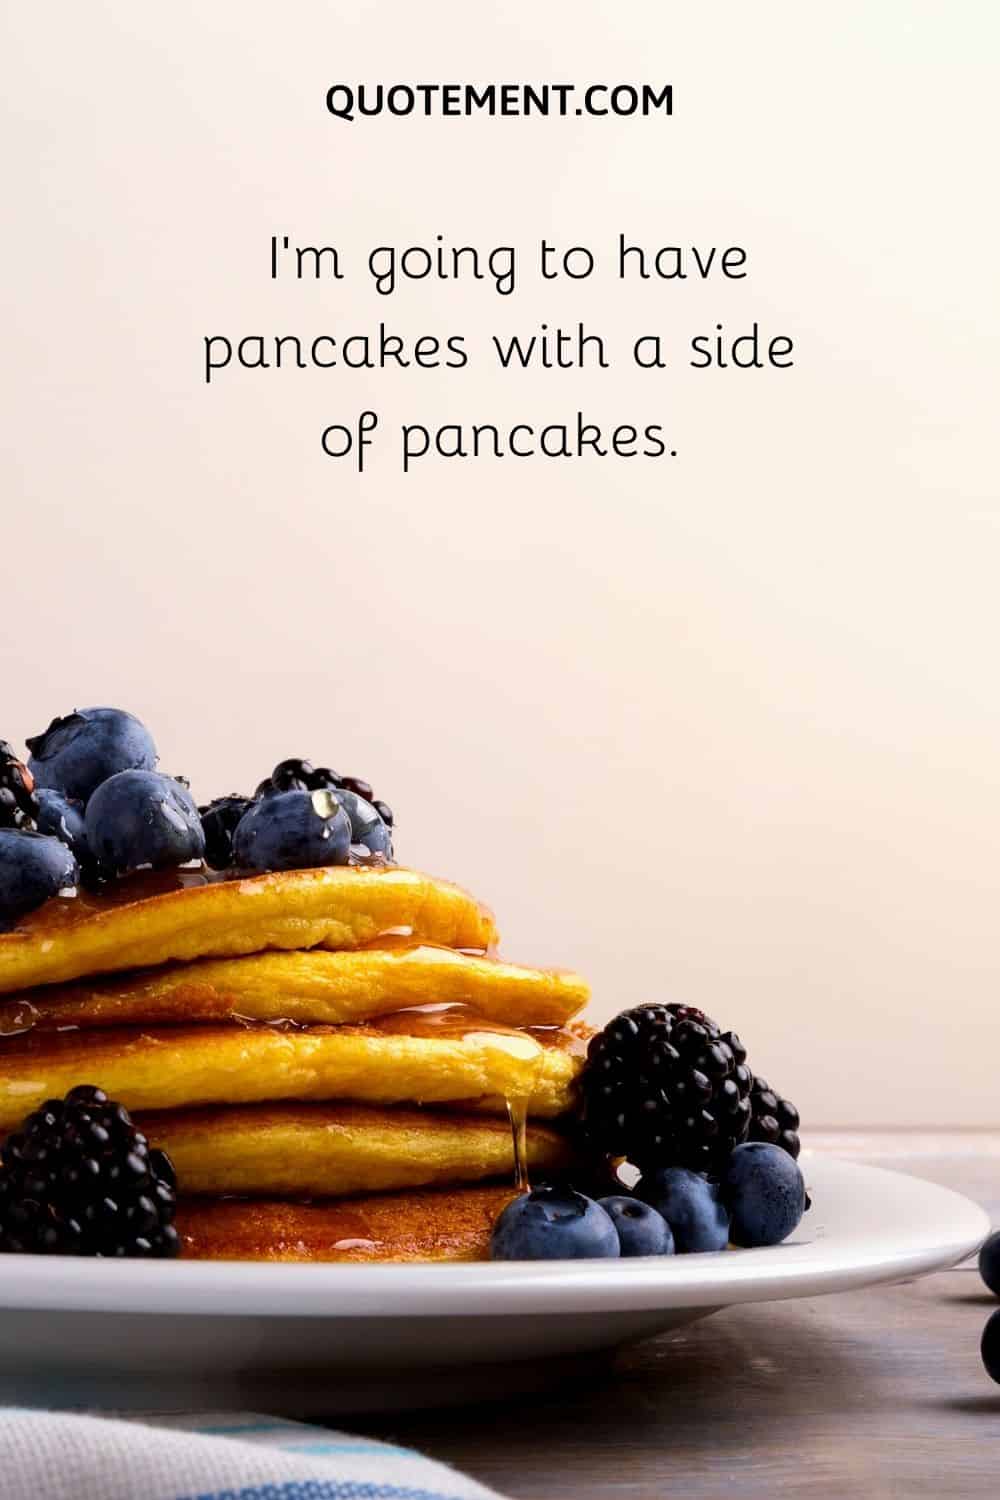 I’m going to have pancakes with a side of pancakes